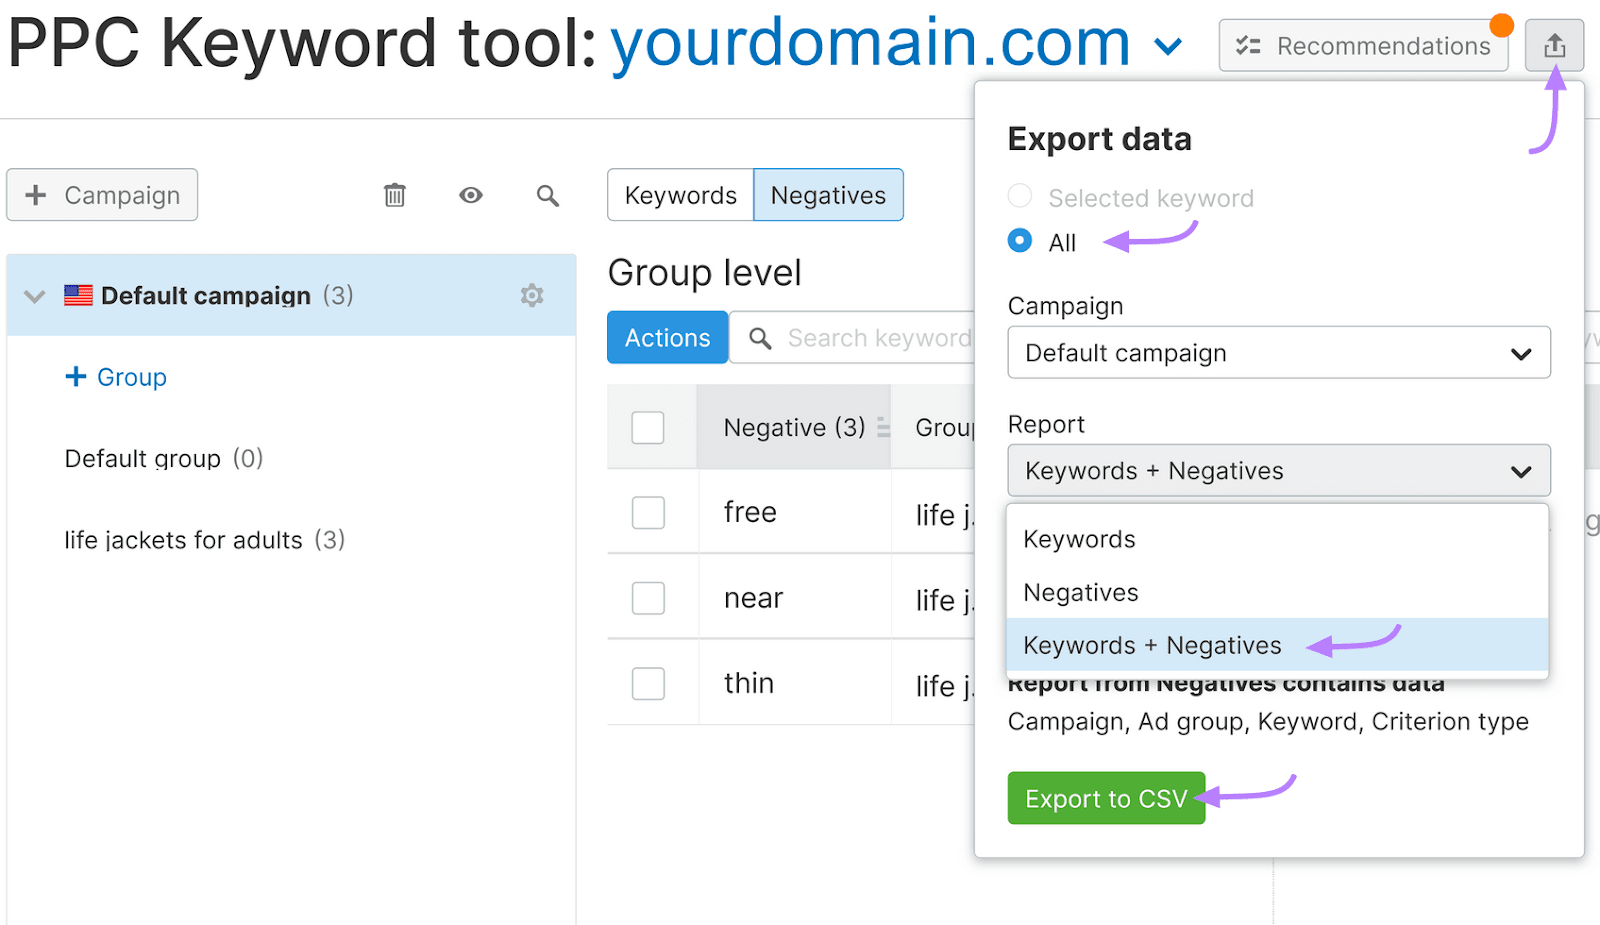 Tool interface with the export menu open on the right, and focus on "All," "Keywords + Negatives," and "Export to CSV."